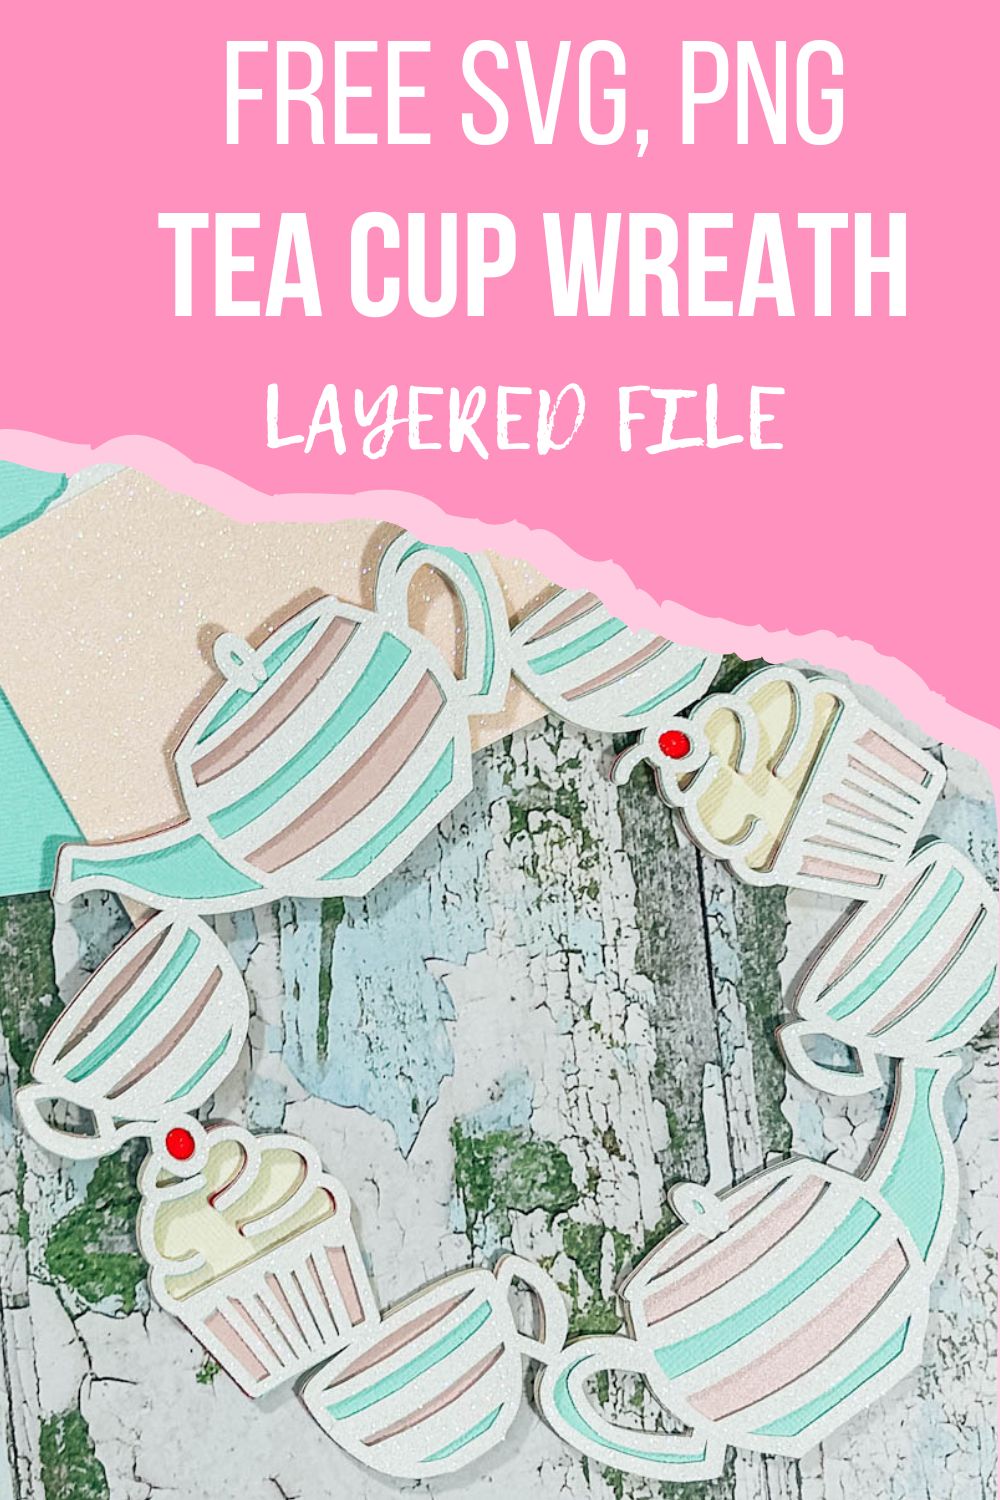 Free SVG, PNG Tea Cup Wreath layered File